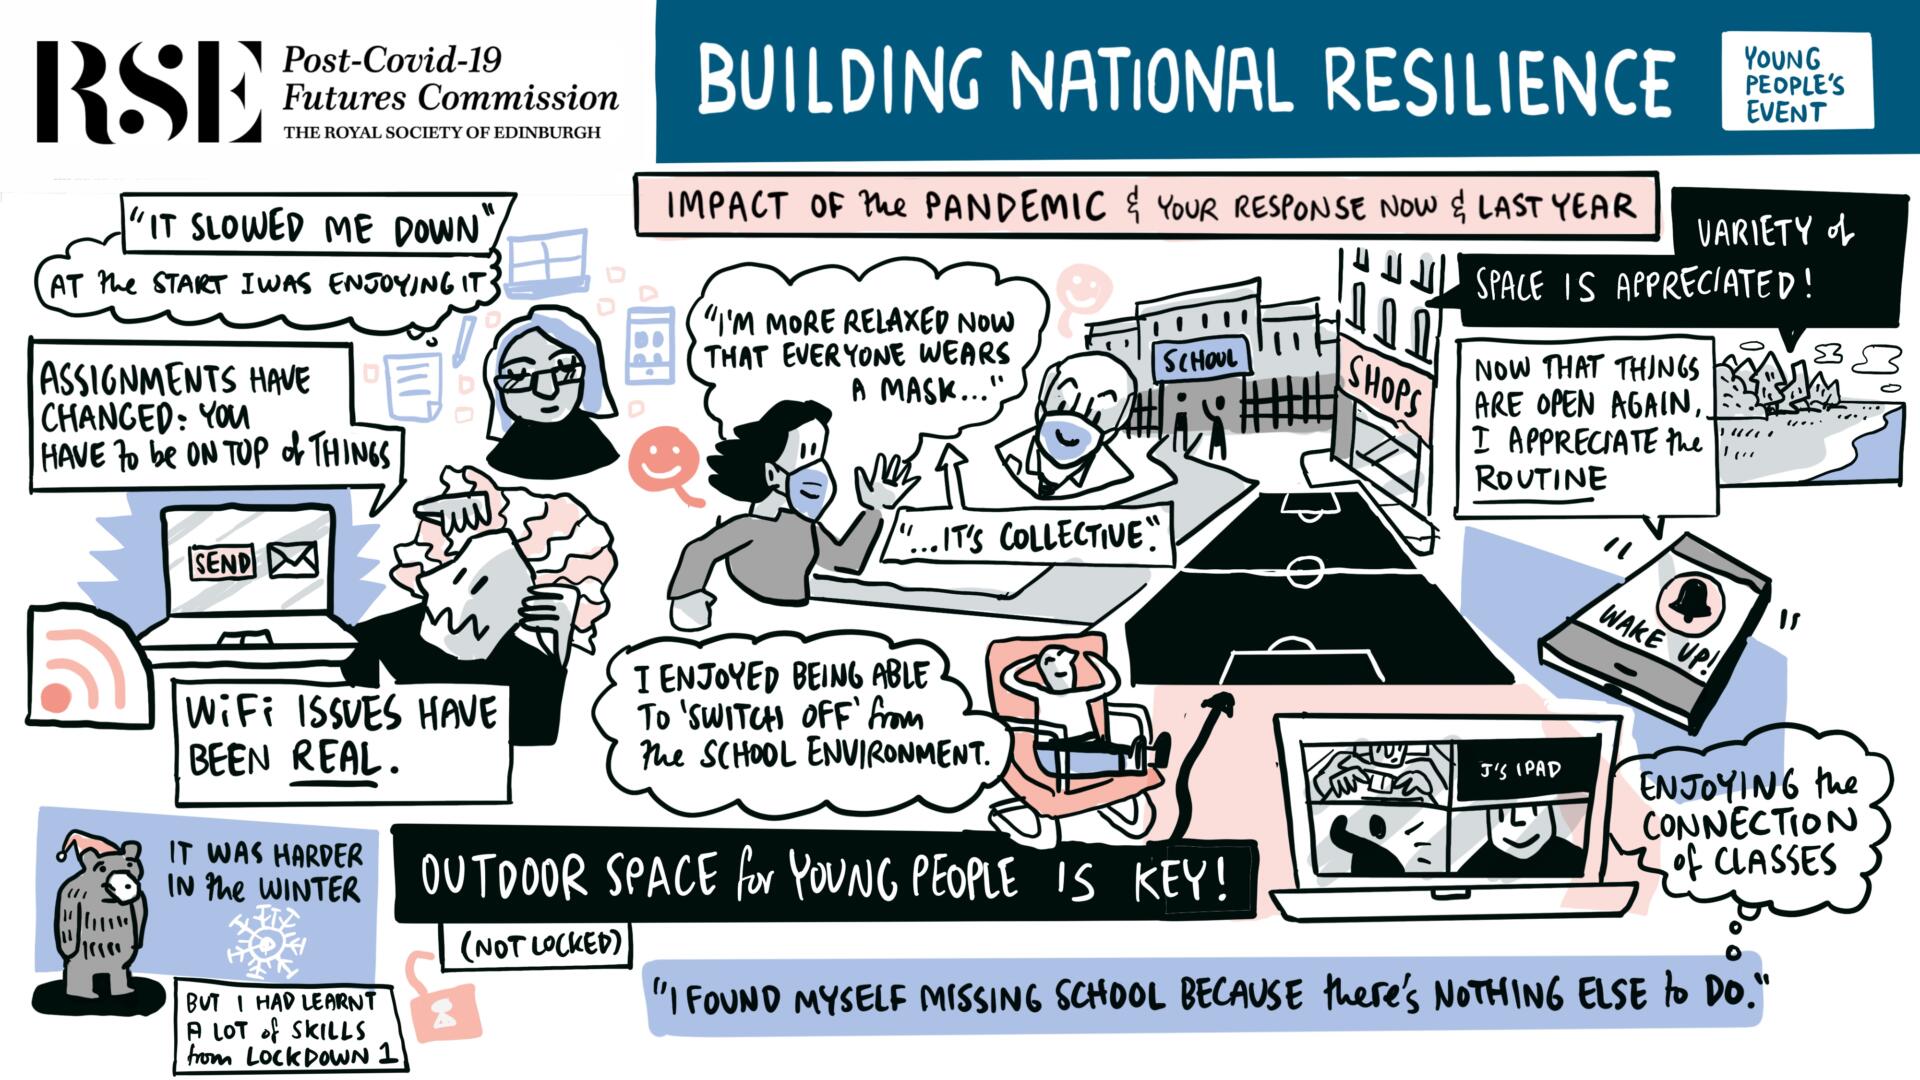 A digitally illustrated doodle including key themes from the topic of 'resilience'.